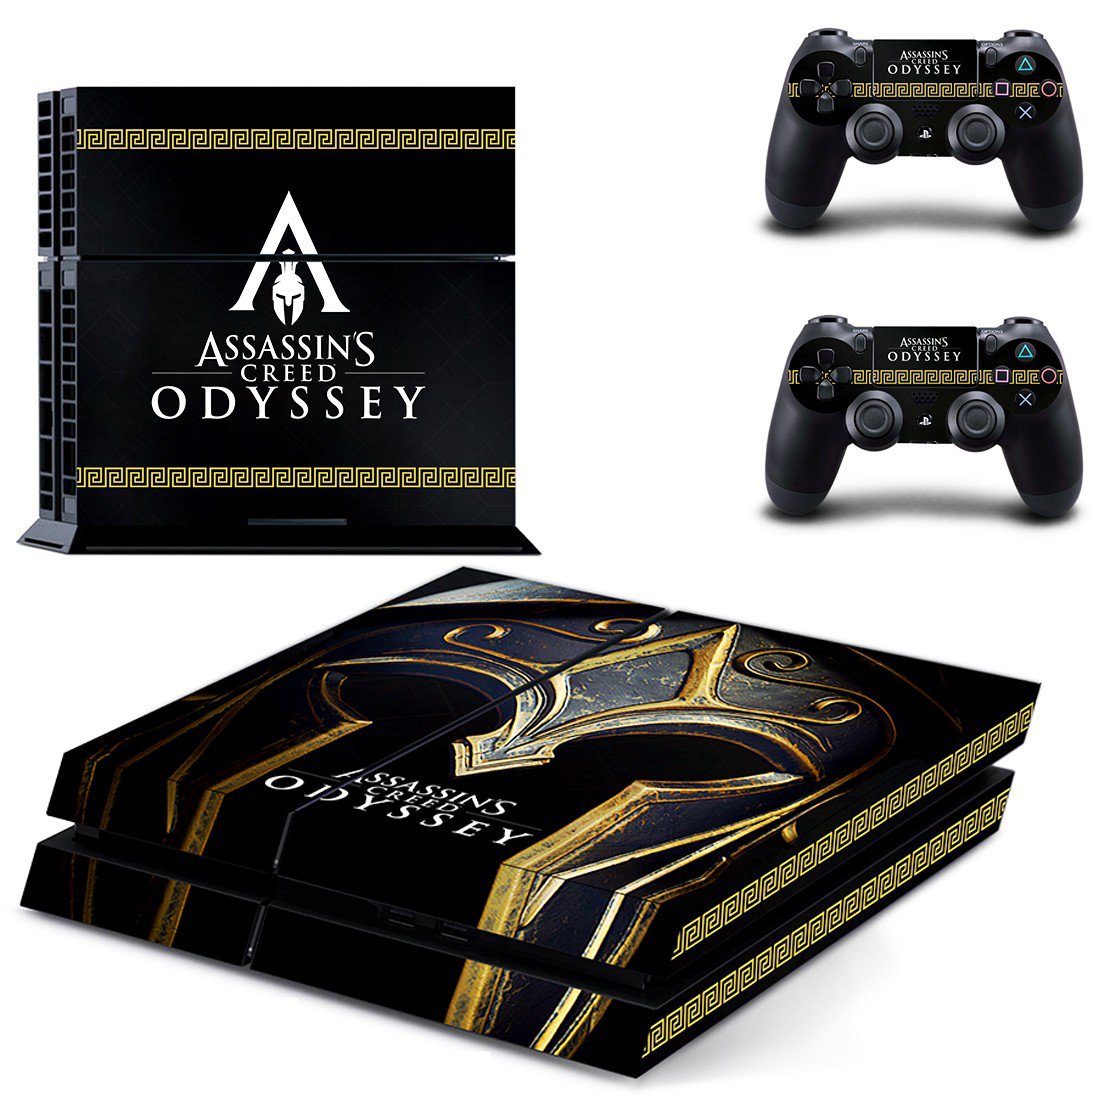 PlayStation 4 And Controllers Skin Cover Assassin's Creed Odyssey Design 7